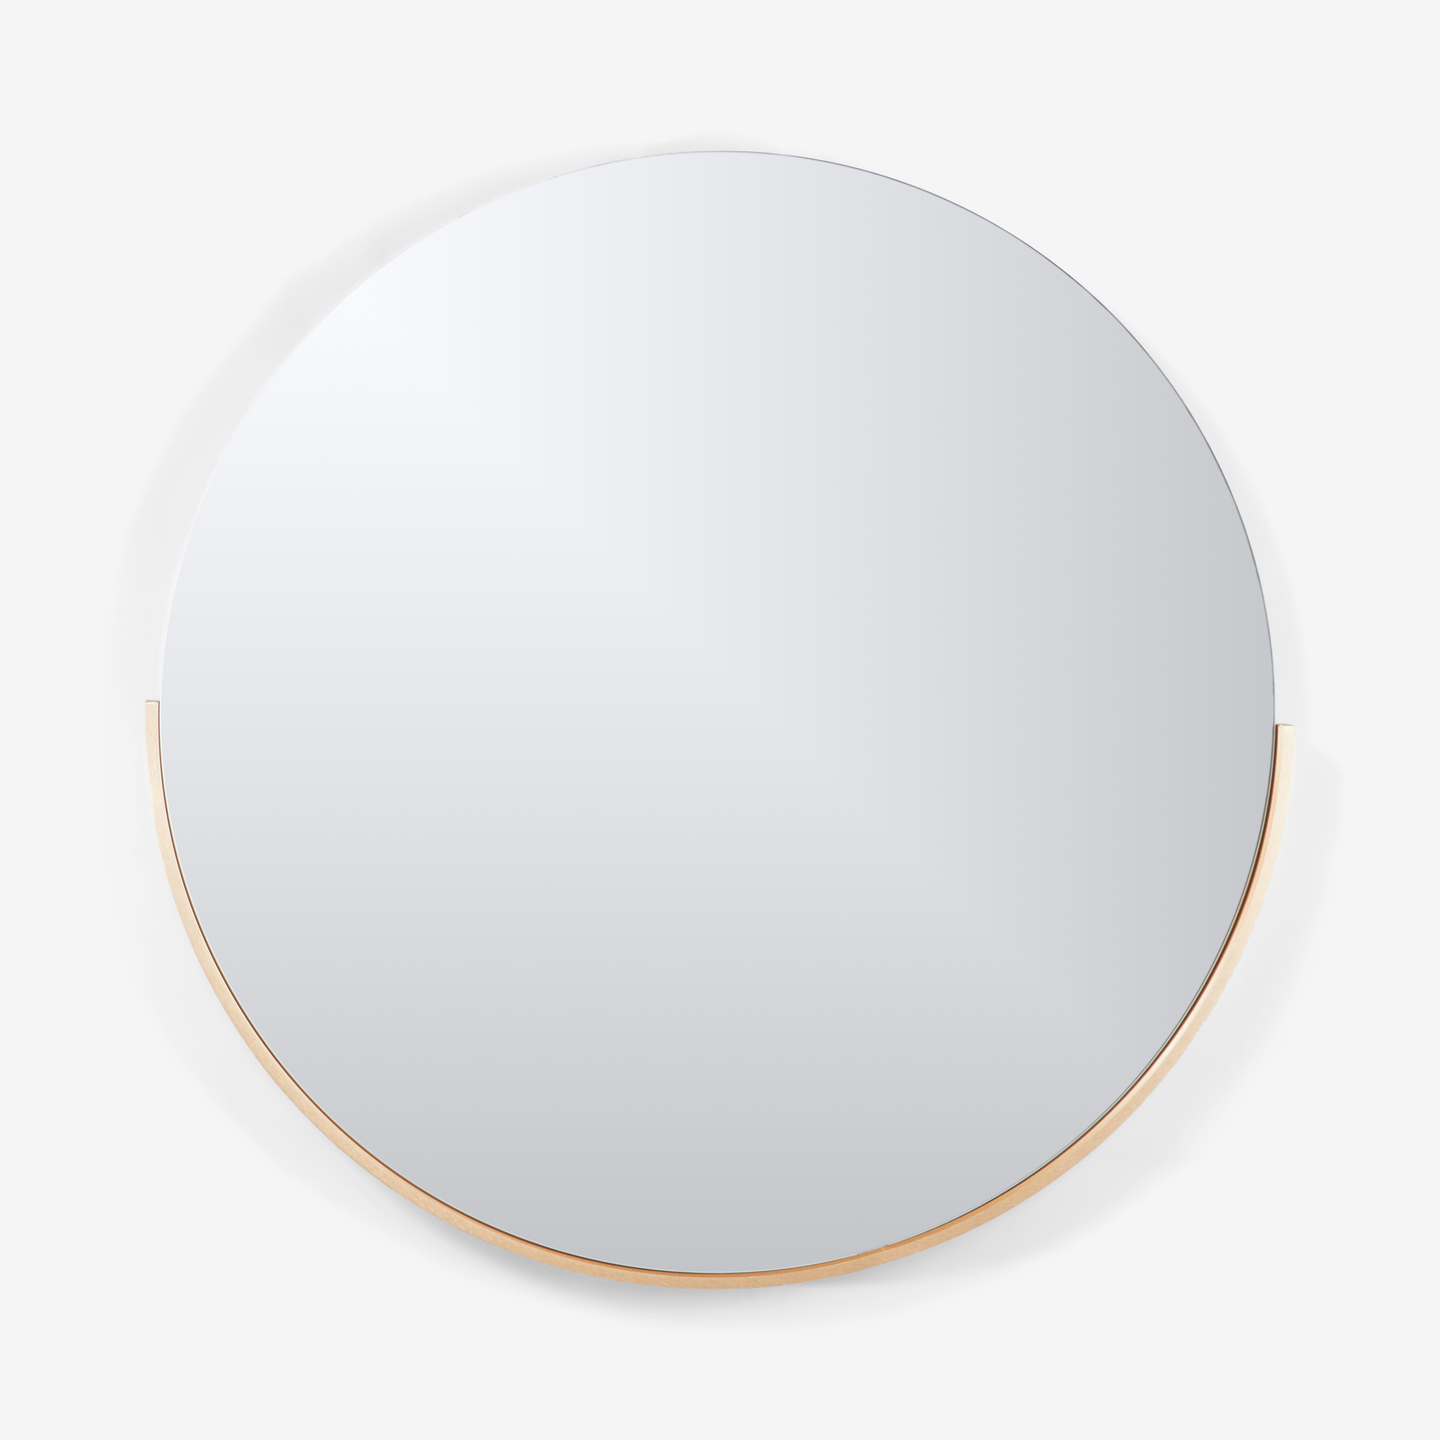 703_Gerald-Small-30in-Round-Wall-Mirror_Flat-Front_California-Chic_Living-Room-6 2020